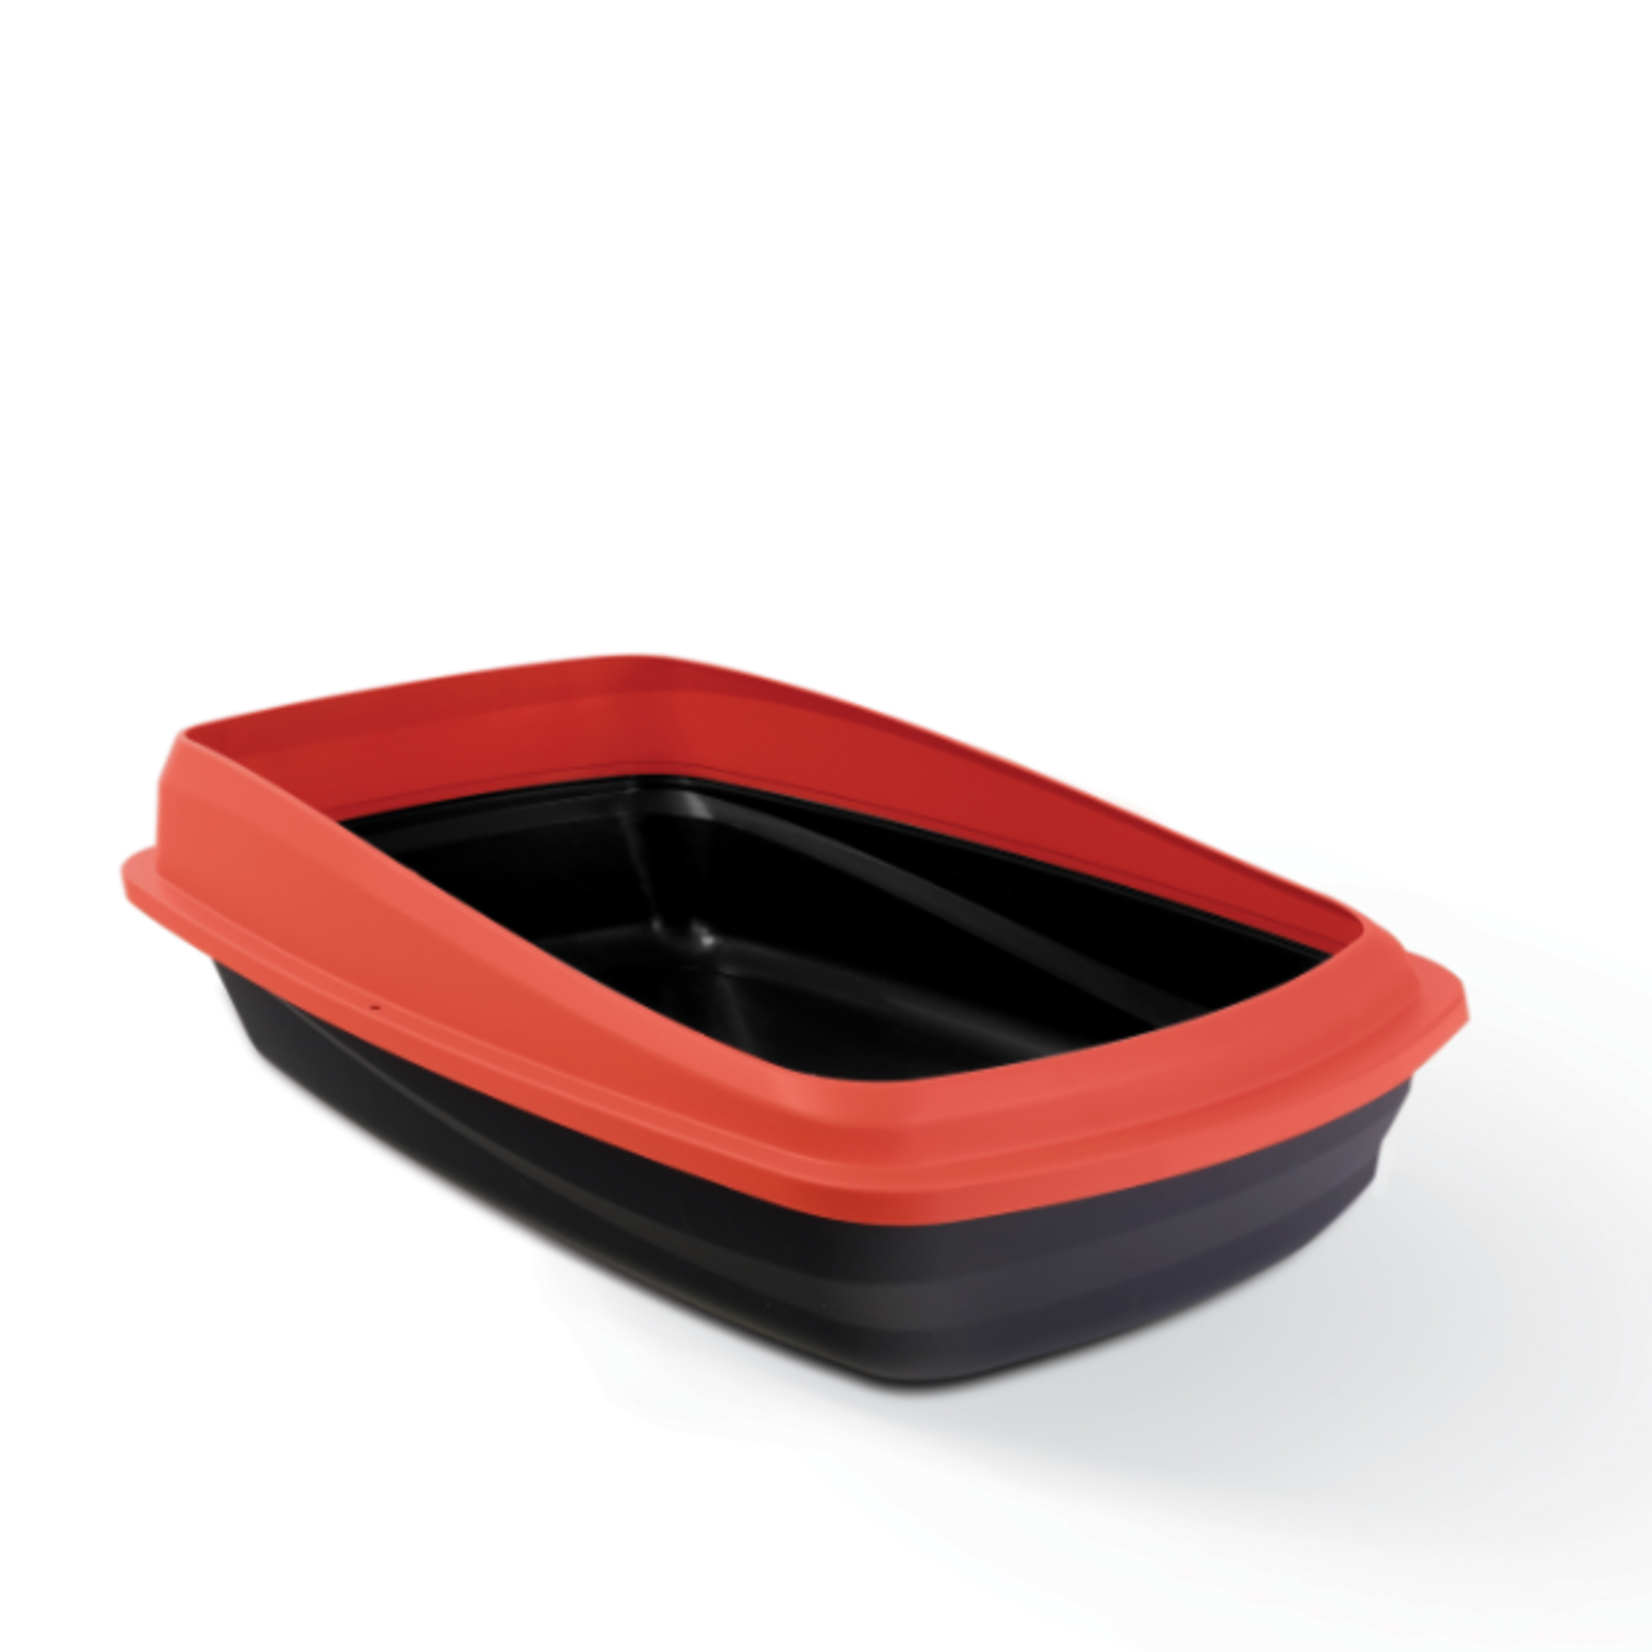 Catit Cat Pan with Removable Rim - Red & Charcoal - Large - 16.9 x 22.4 x 8.6 in